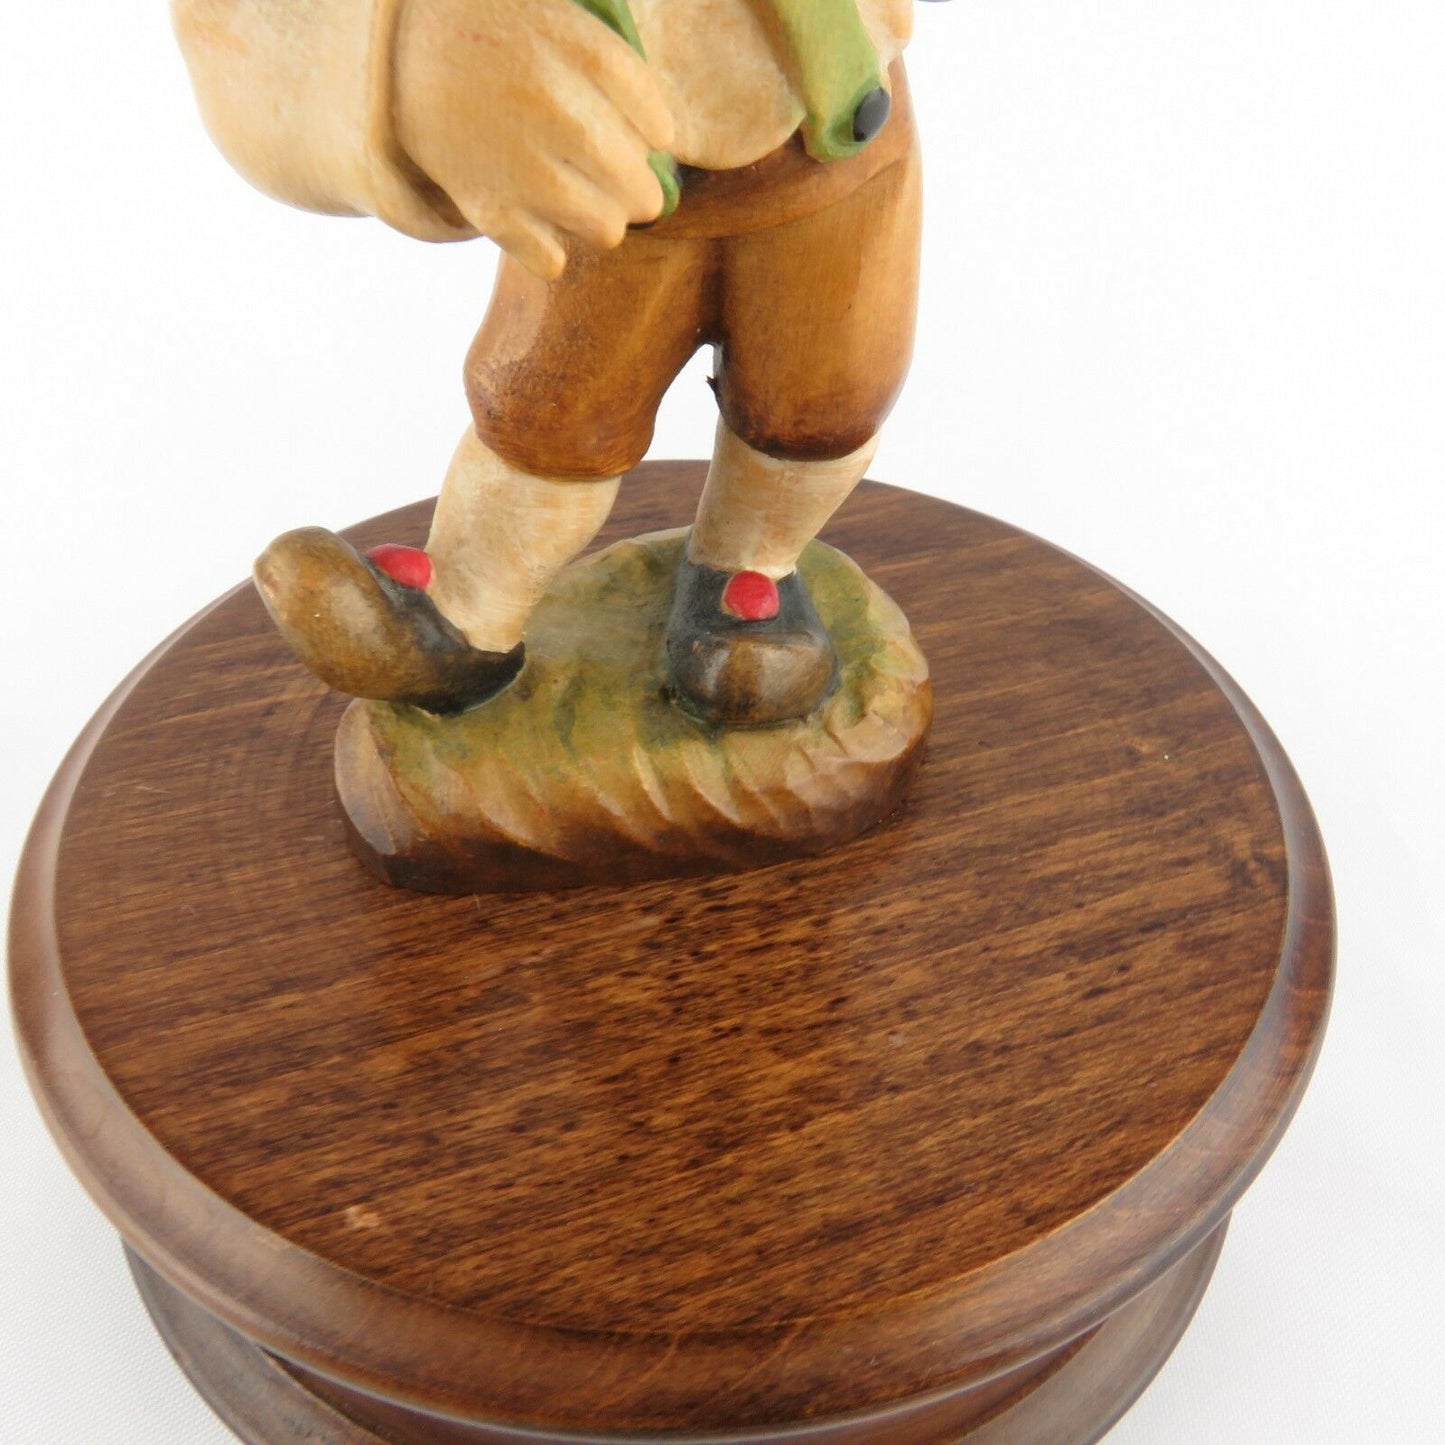 Vintage Carved Reuge The Music Box Dancer Boy Romy Swiss Musical Movement Video - At Grandma's Table